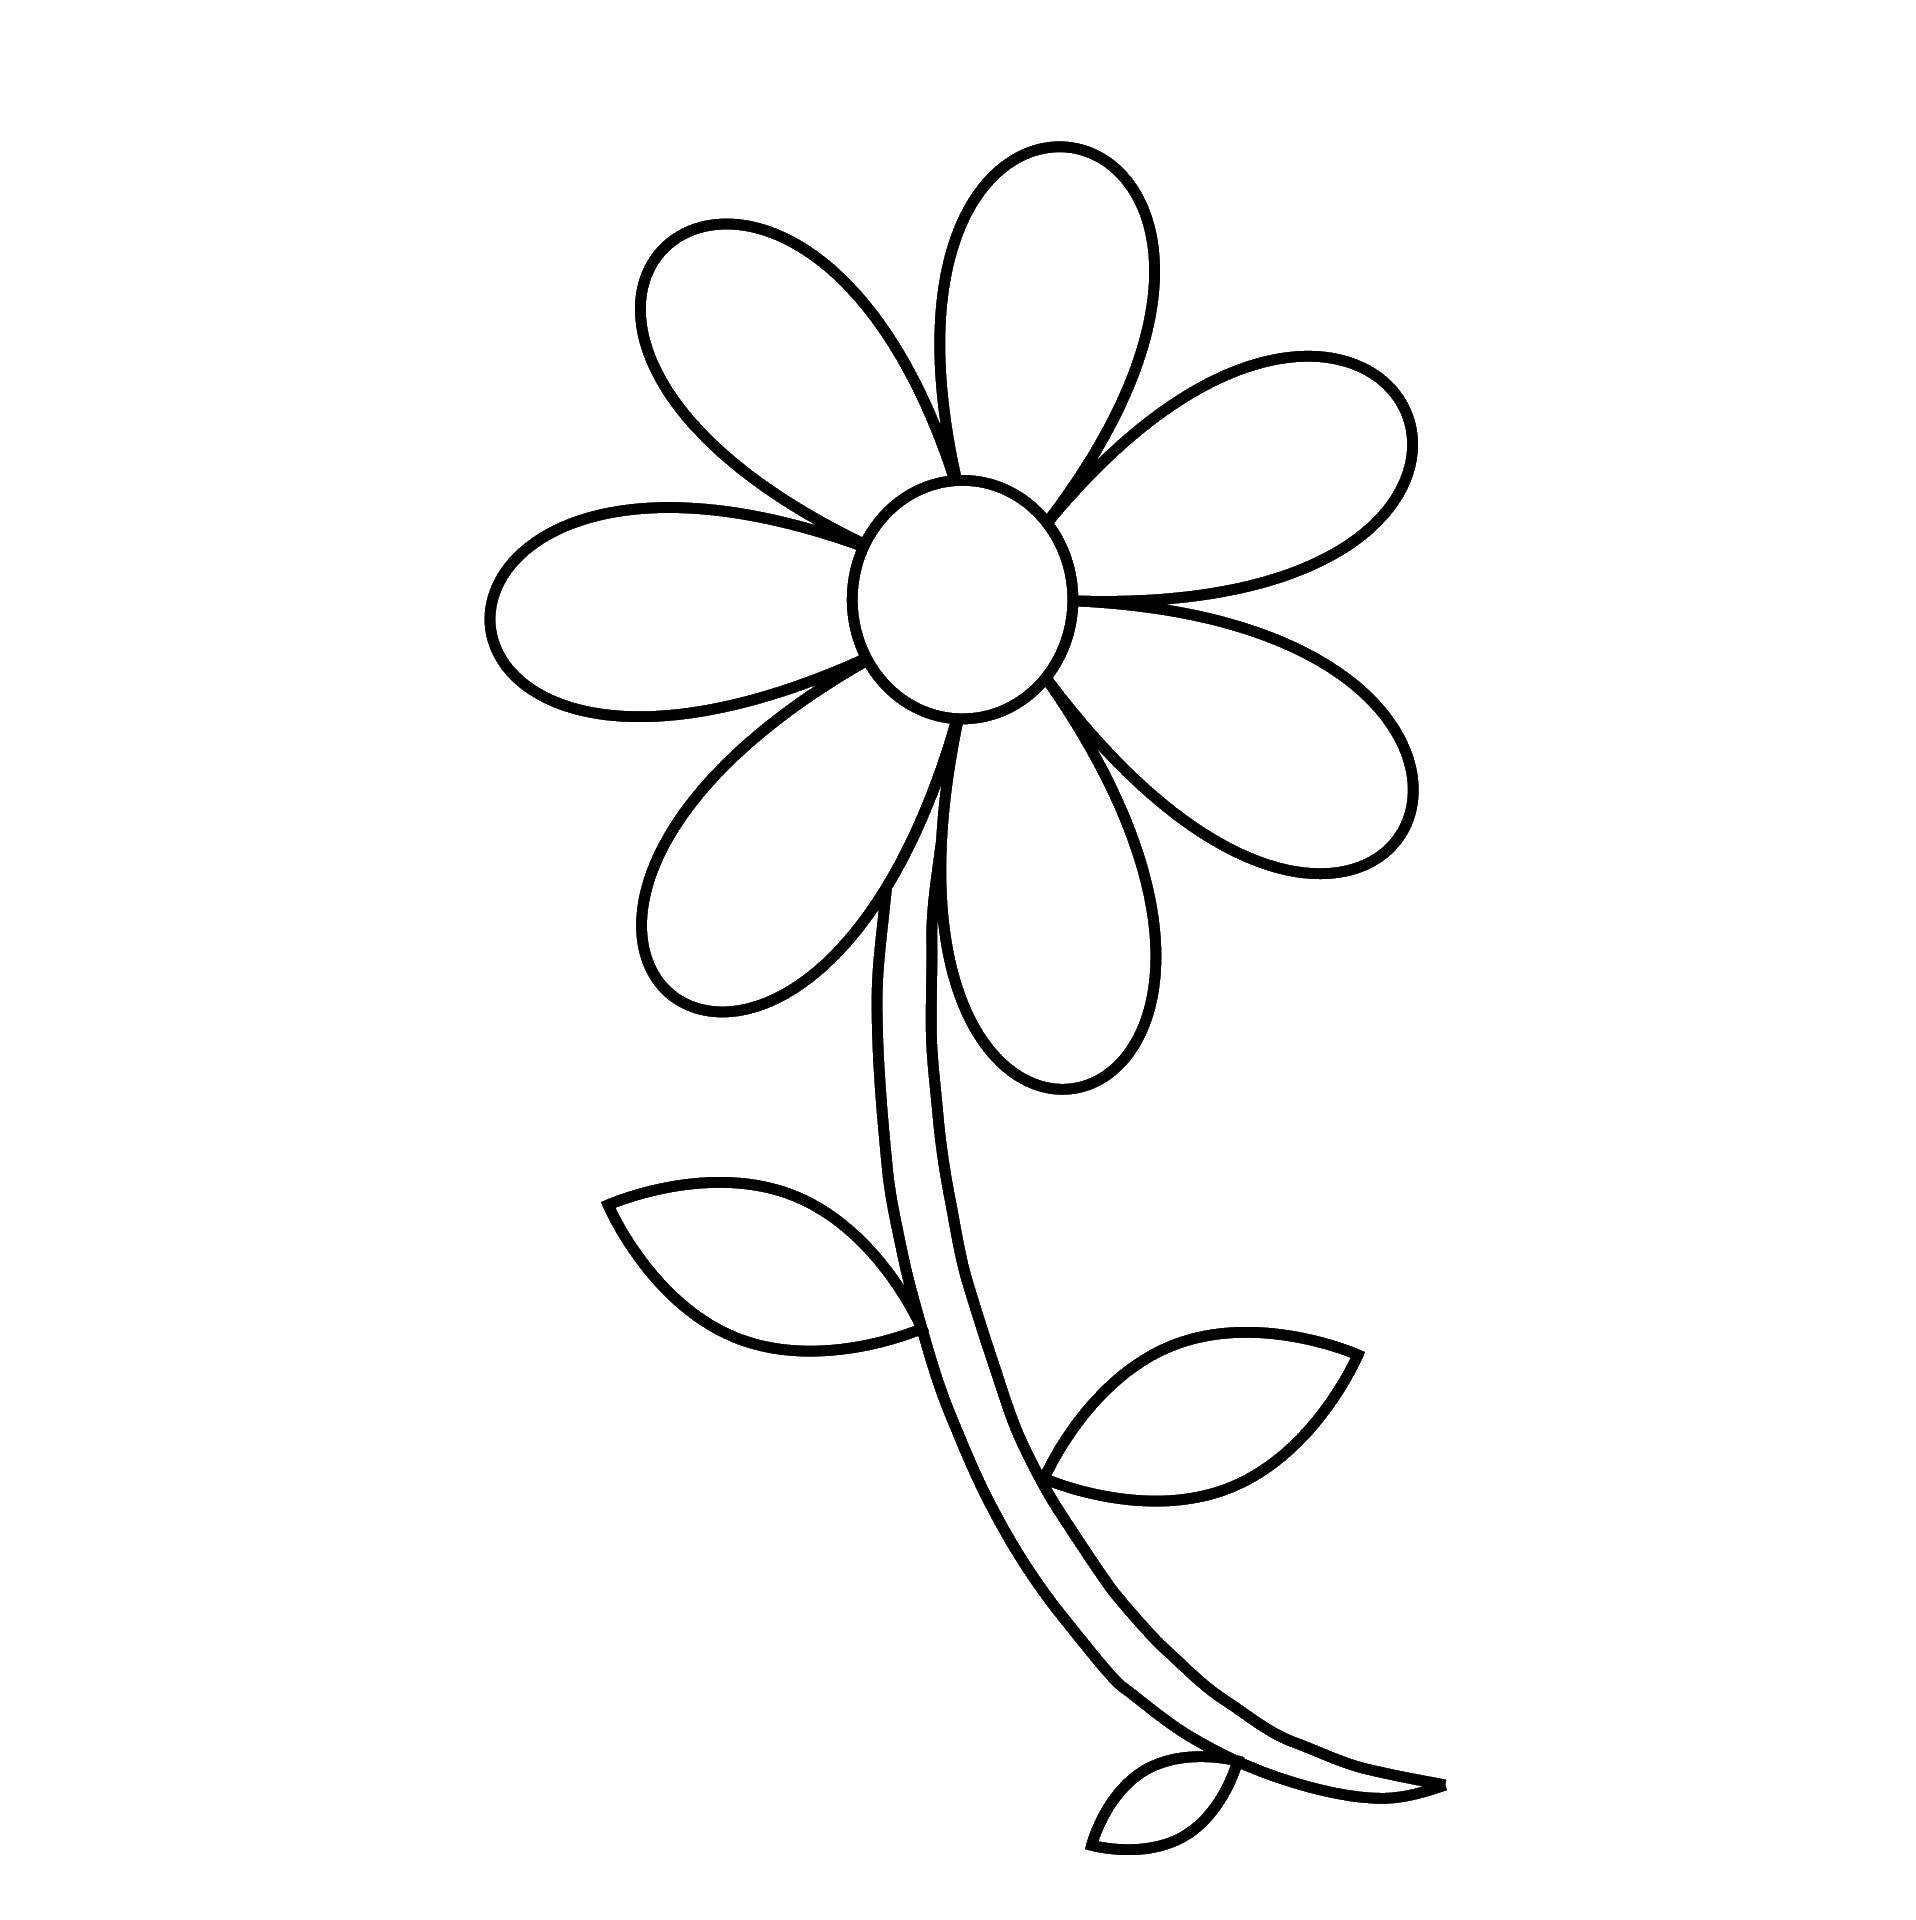 Coloring Daisy on the stalk. Category The contours of the flower to cut. Tags:  chamomile, stem, leaves.